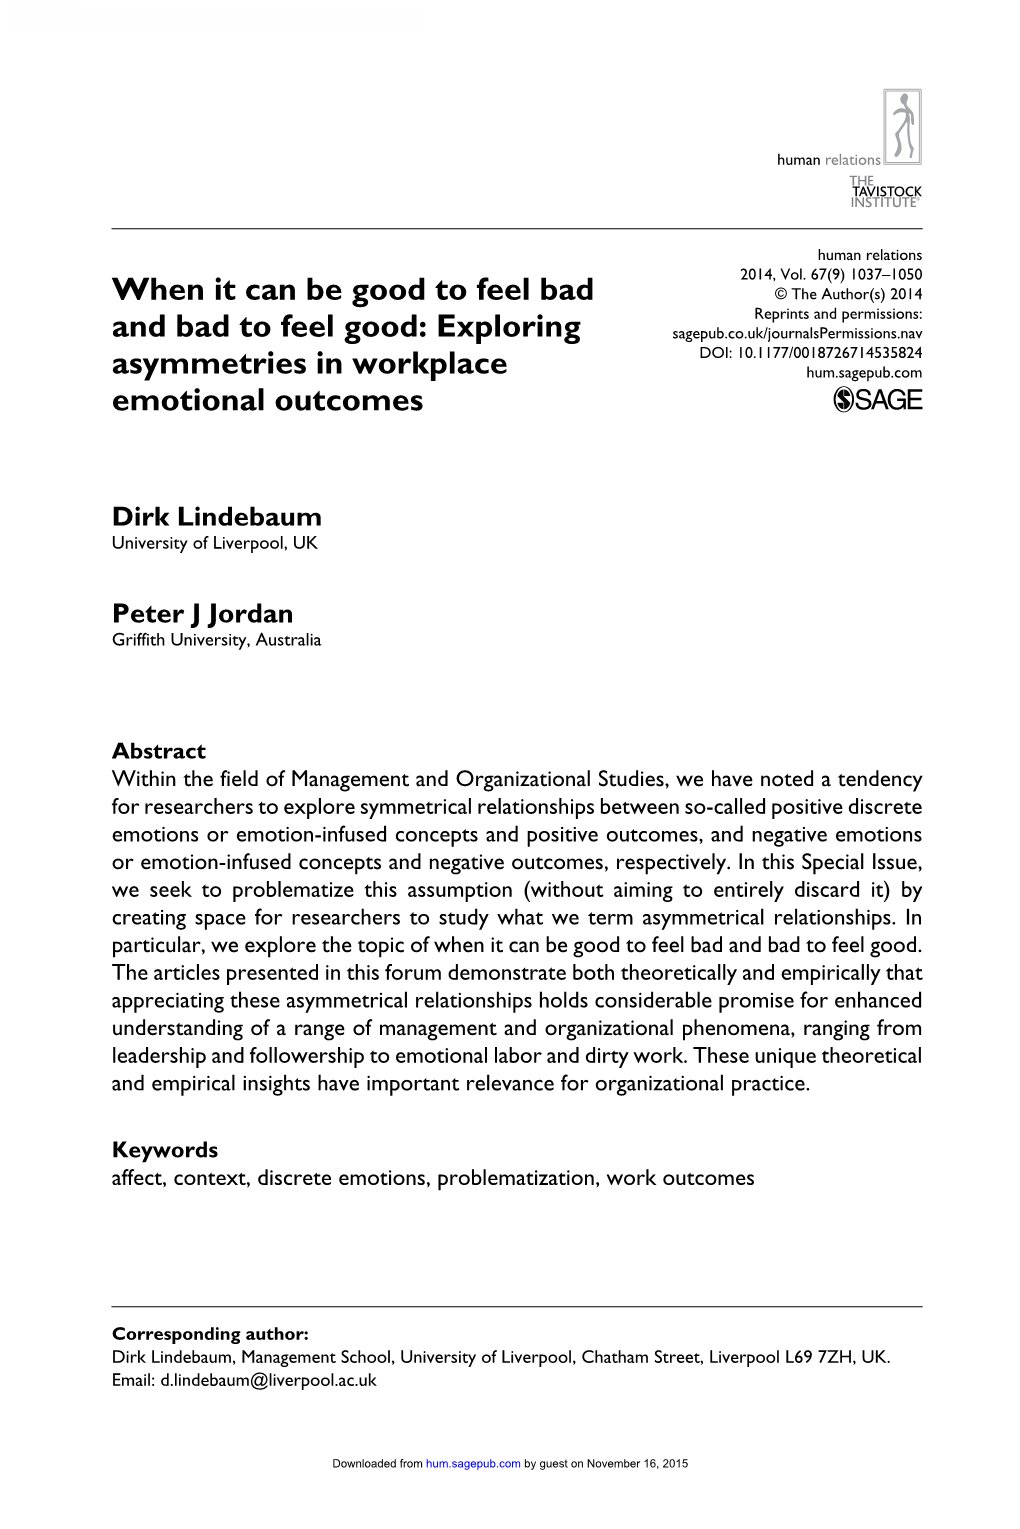 Exploring Asymmetries in Workplace Emotional Outcomes